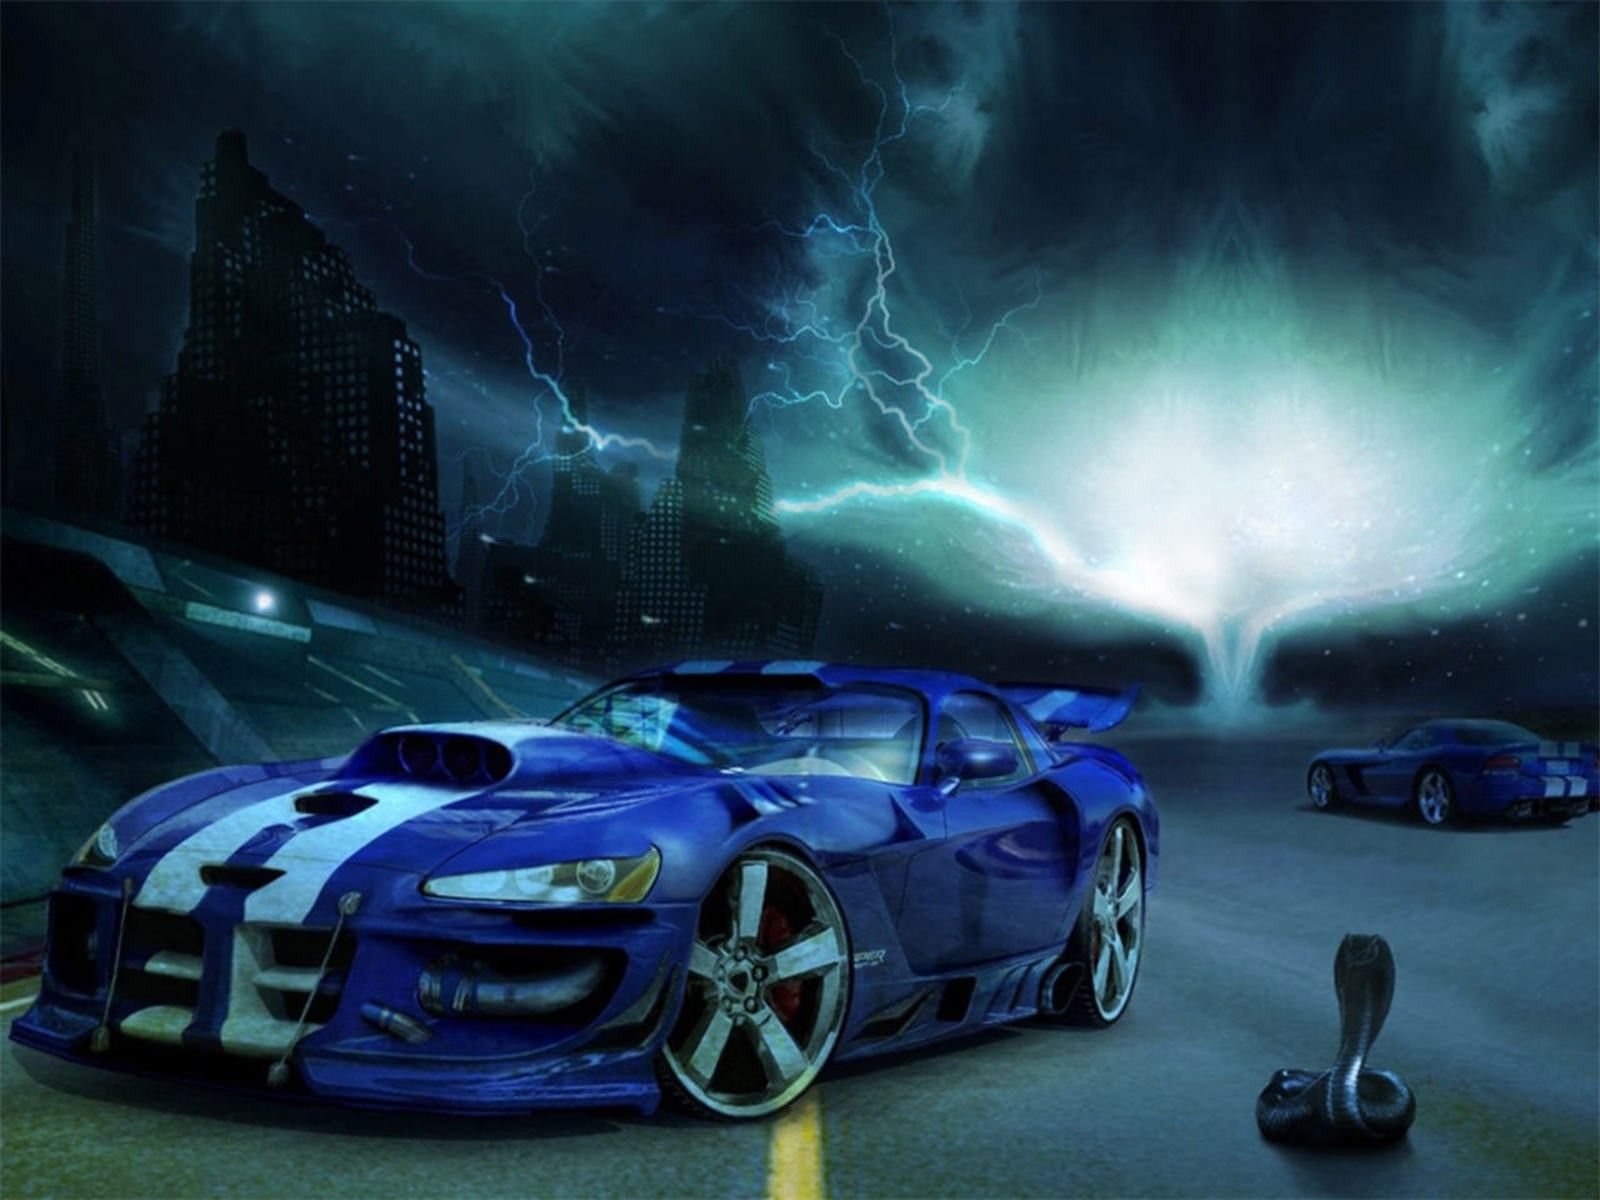 Dodge Viper Backgrounds, Hq, Jaleh Macavddy - Cool Dodge Viper Backgrounds - HD Wallpaper 